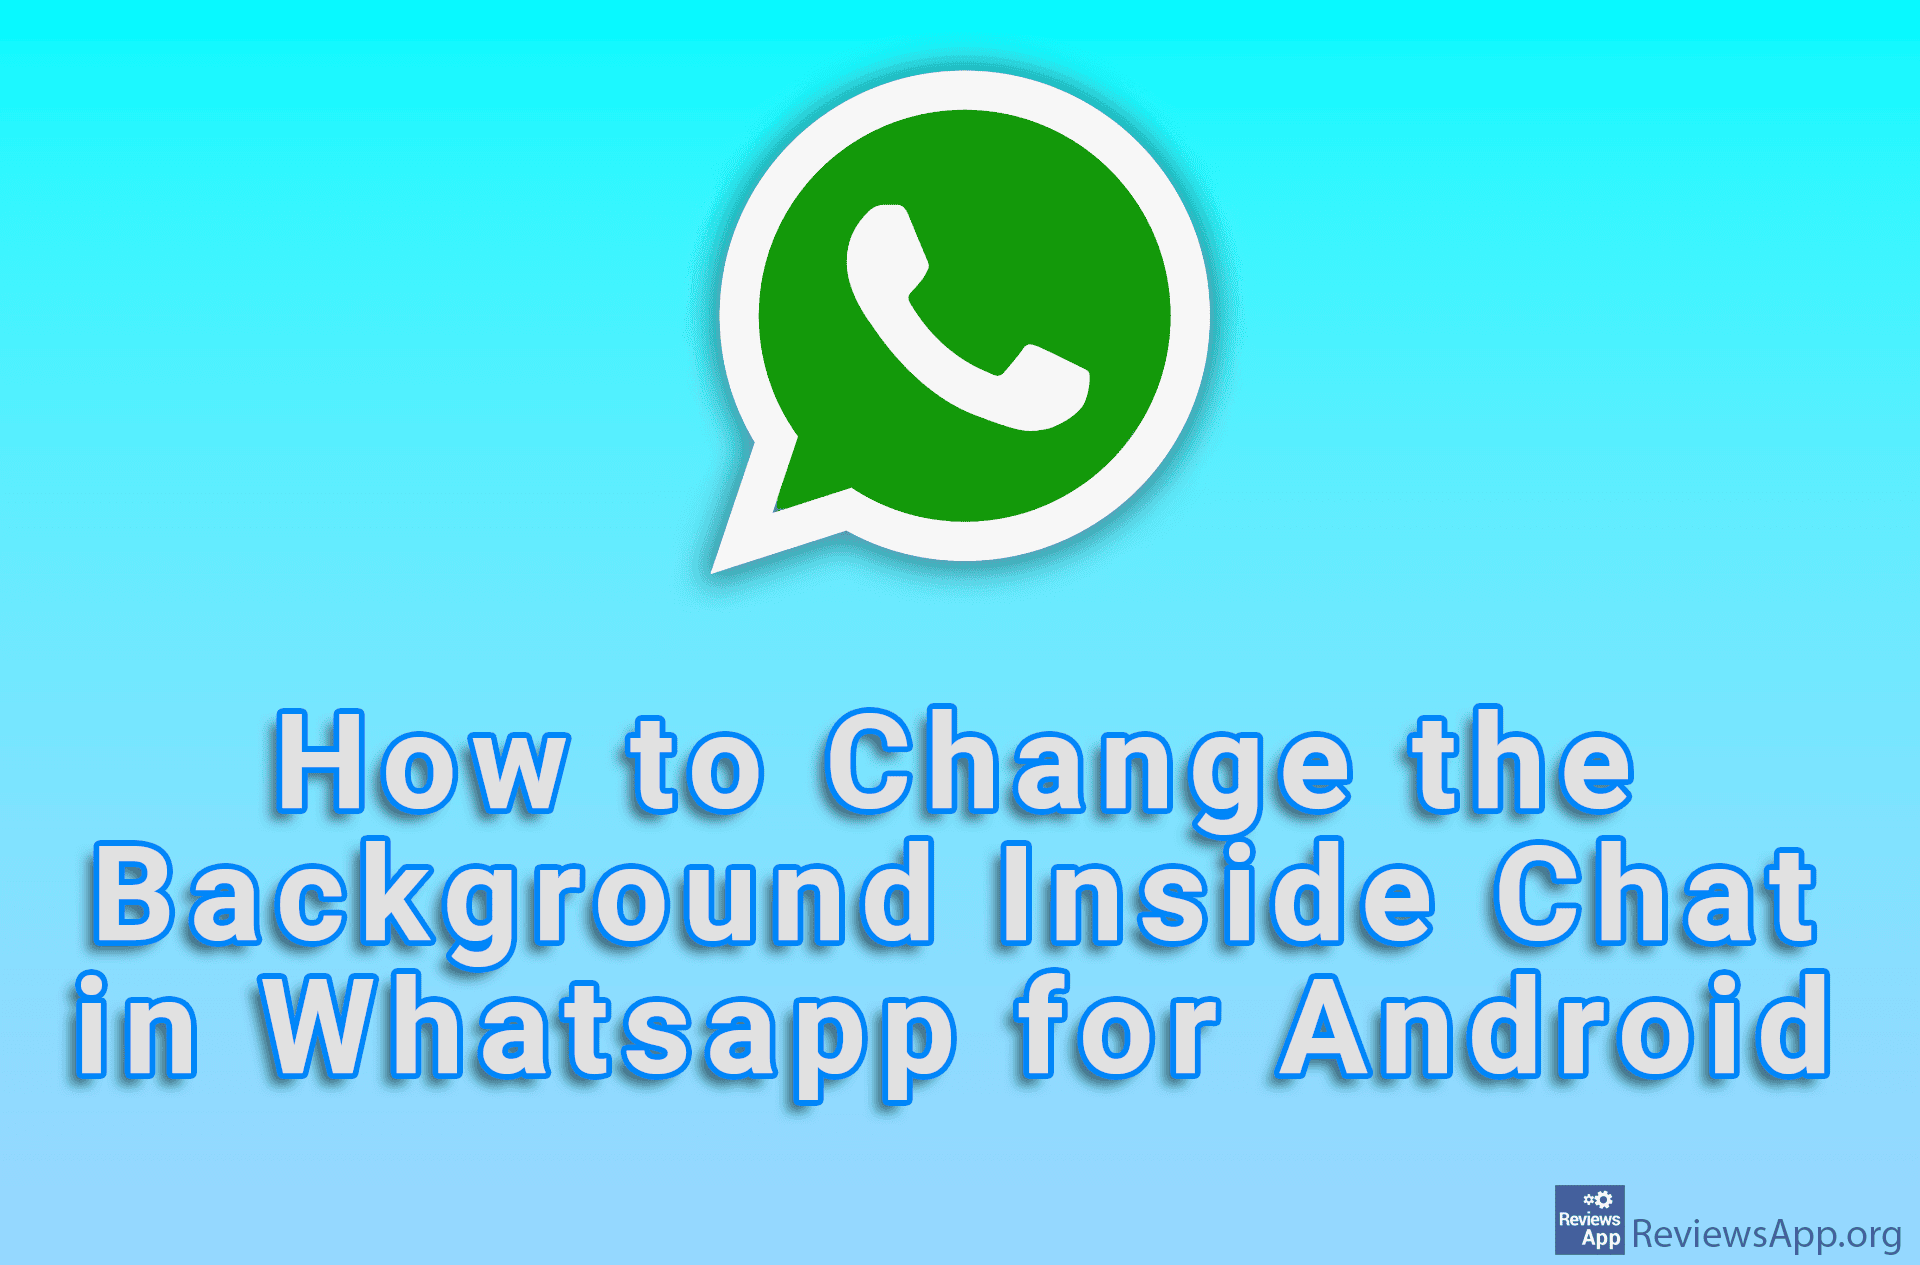 How to Change the Background Inside Chat in WhatsApp for Android